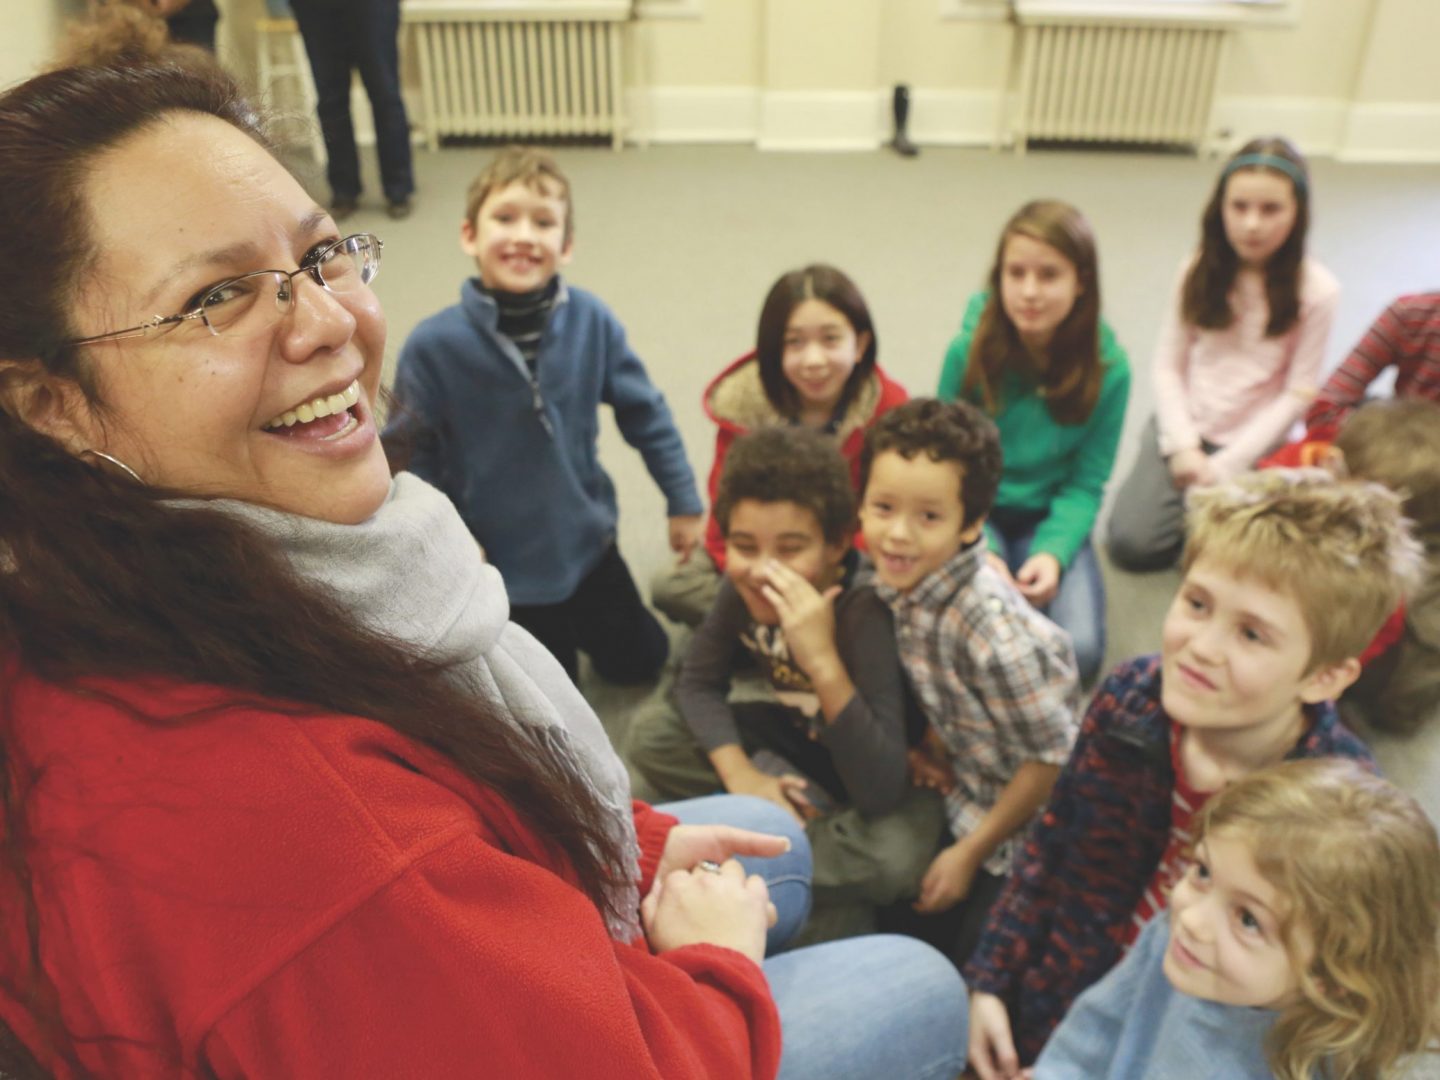 Woman in red jacket looks at camera, circle of children on floor smiling